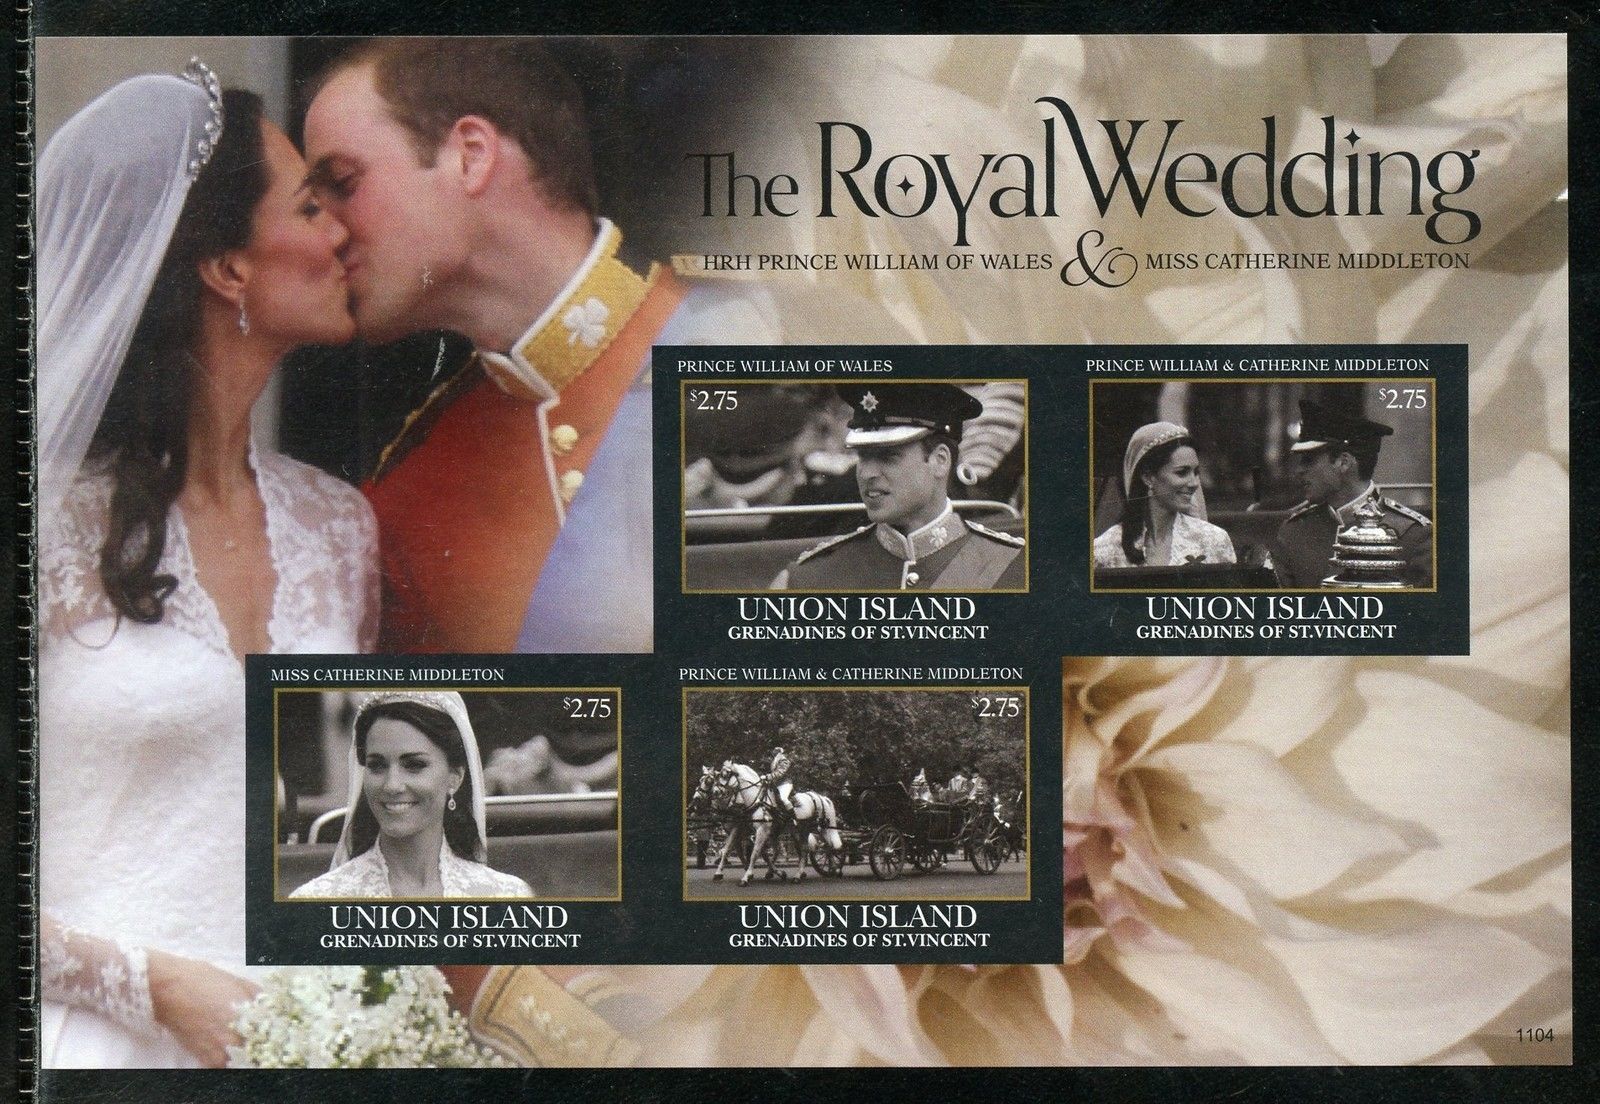 The wedding of Prince William and Miss Catherine Middleton